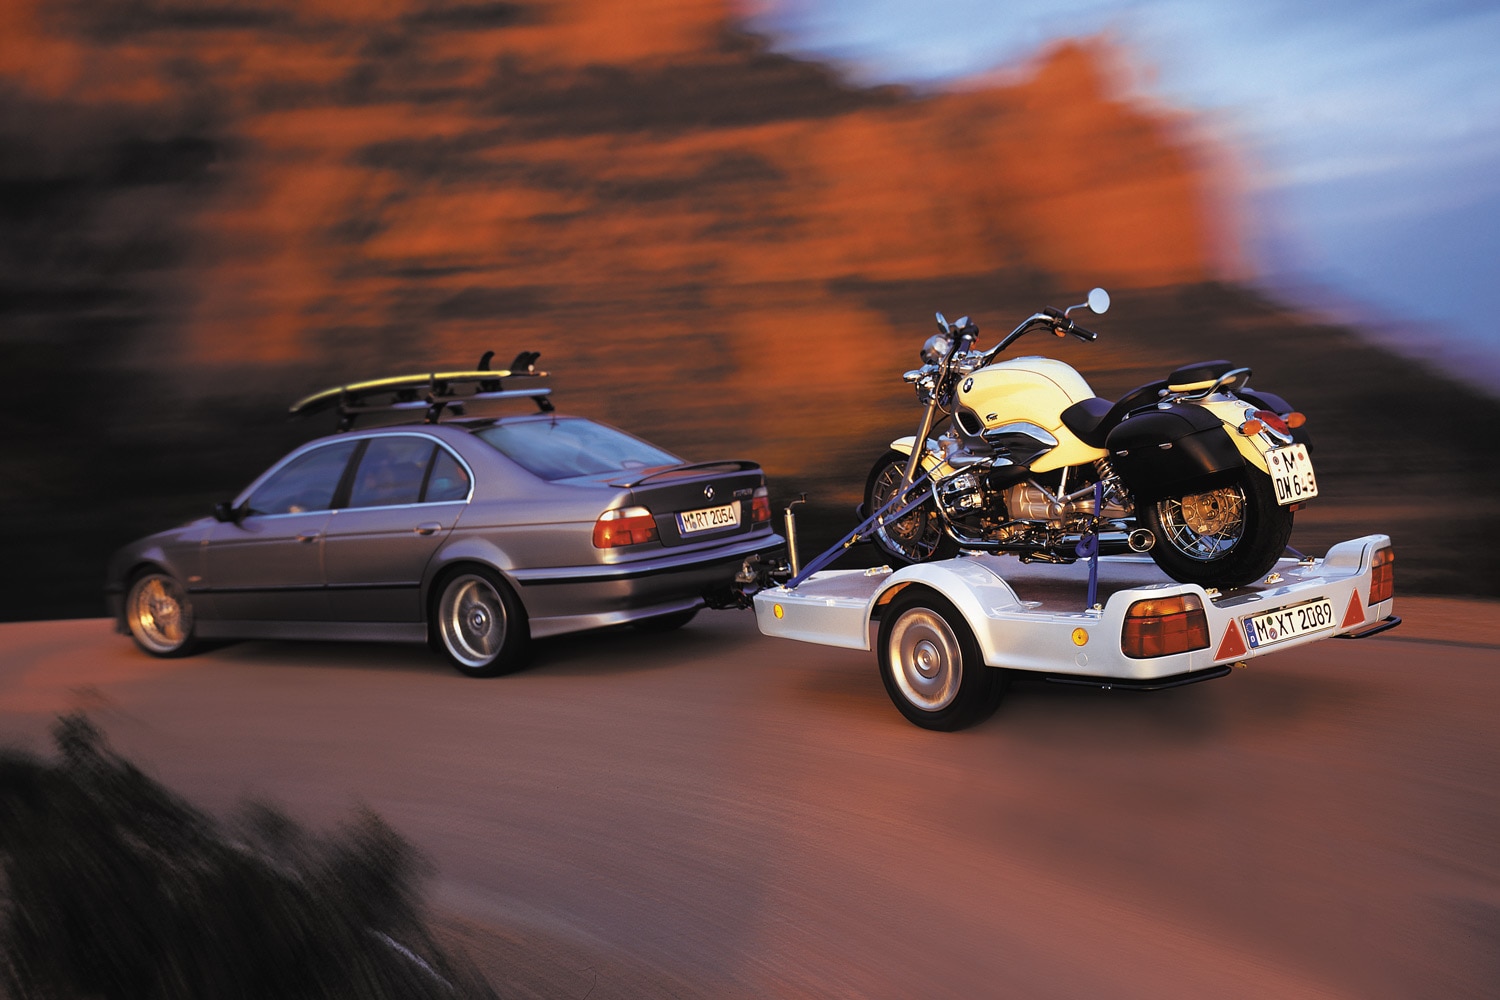 A blue BMW sedan tows a white trailer with a yellow BMW motorcycle.